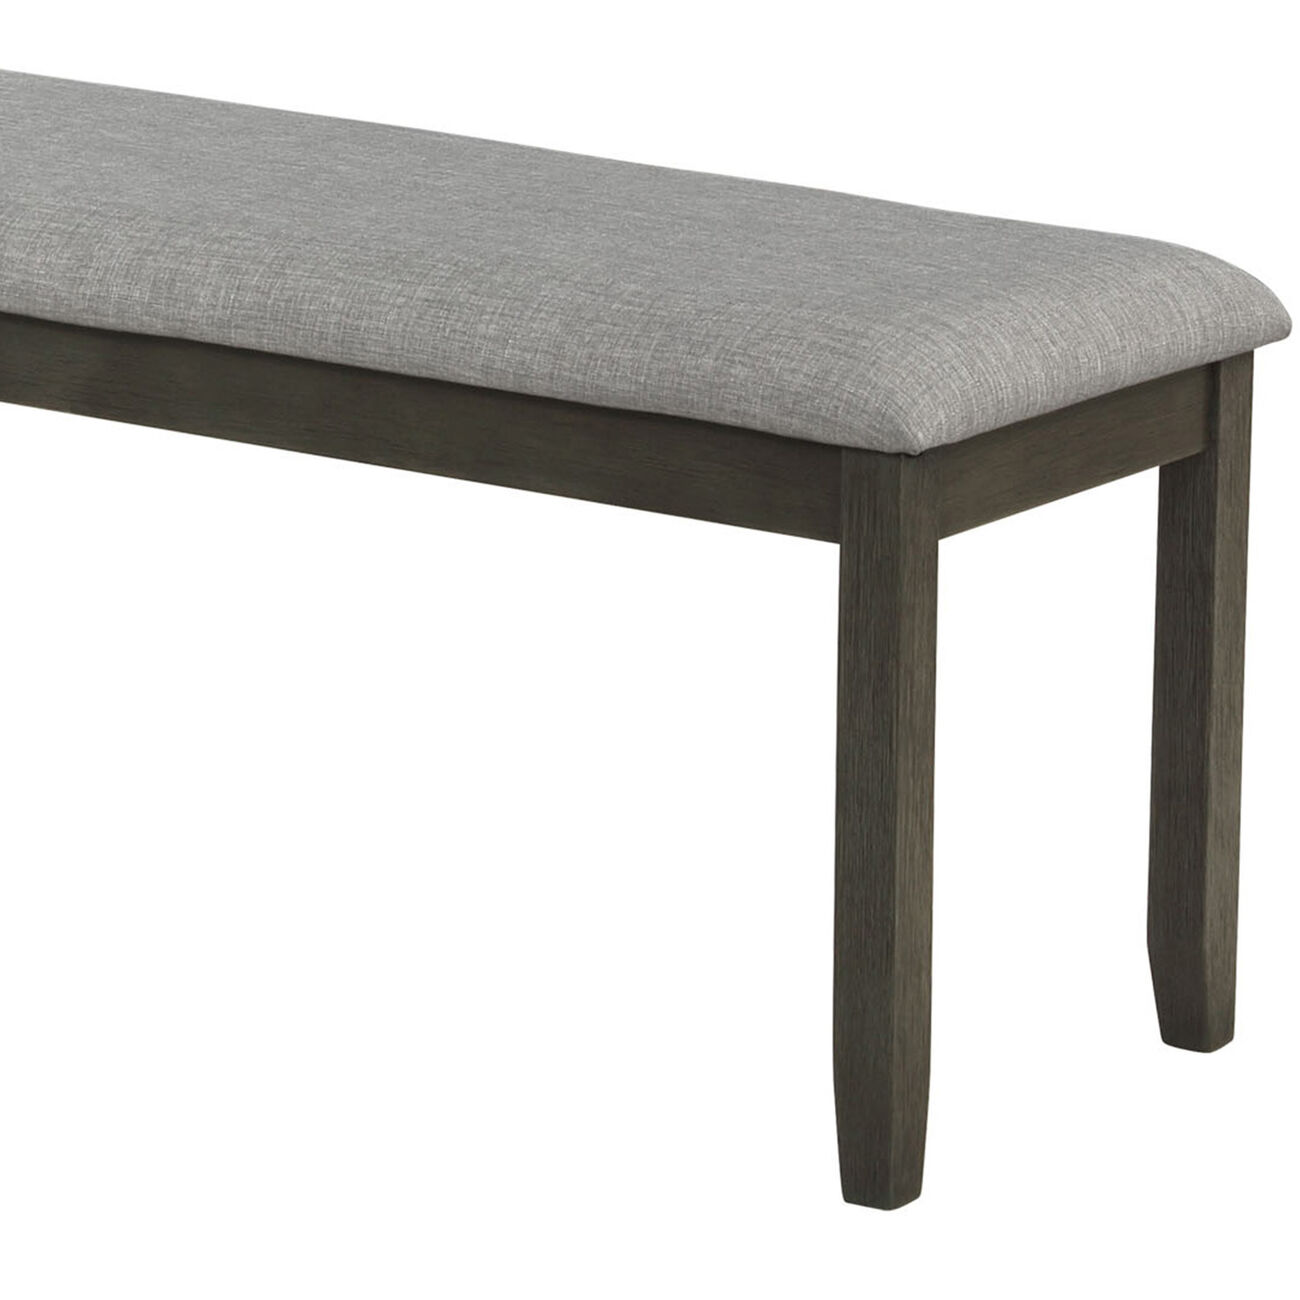 Wooden Bench with Fabric Upholstered Seat and Chamfered Legs, Gray - BM215420